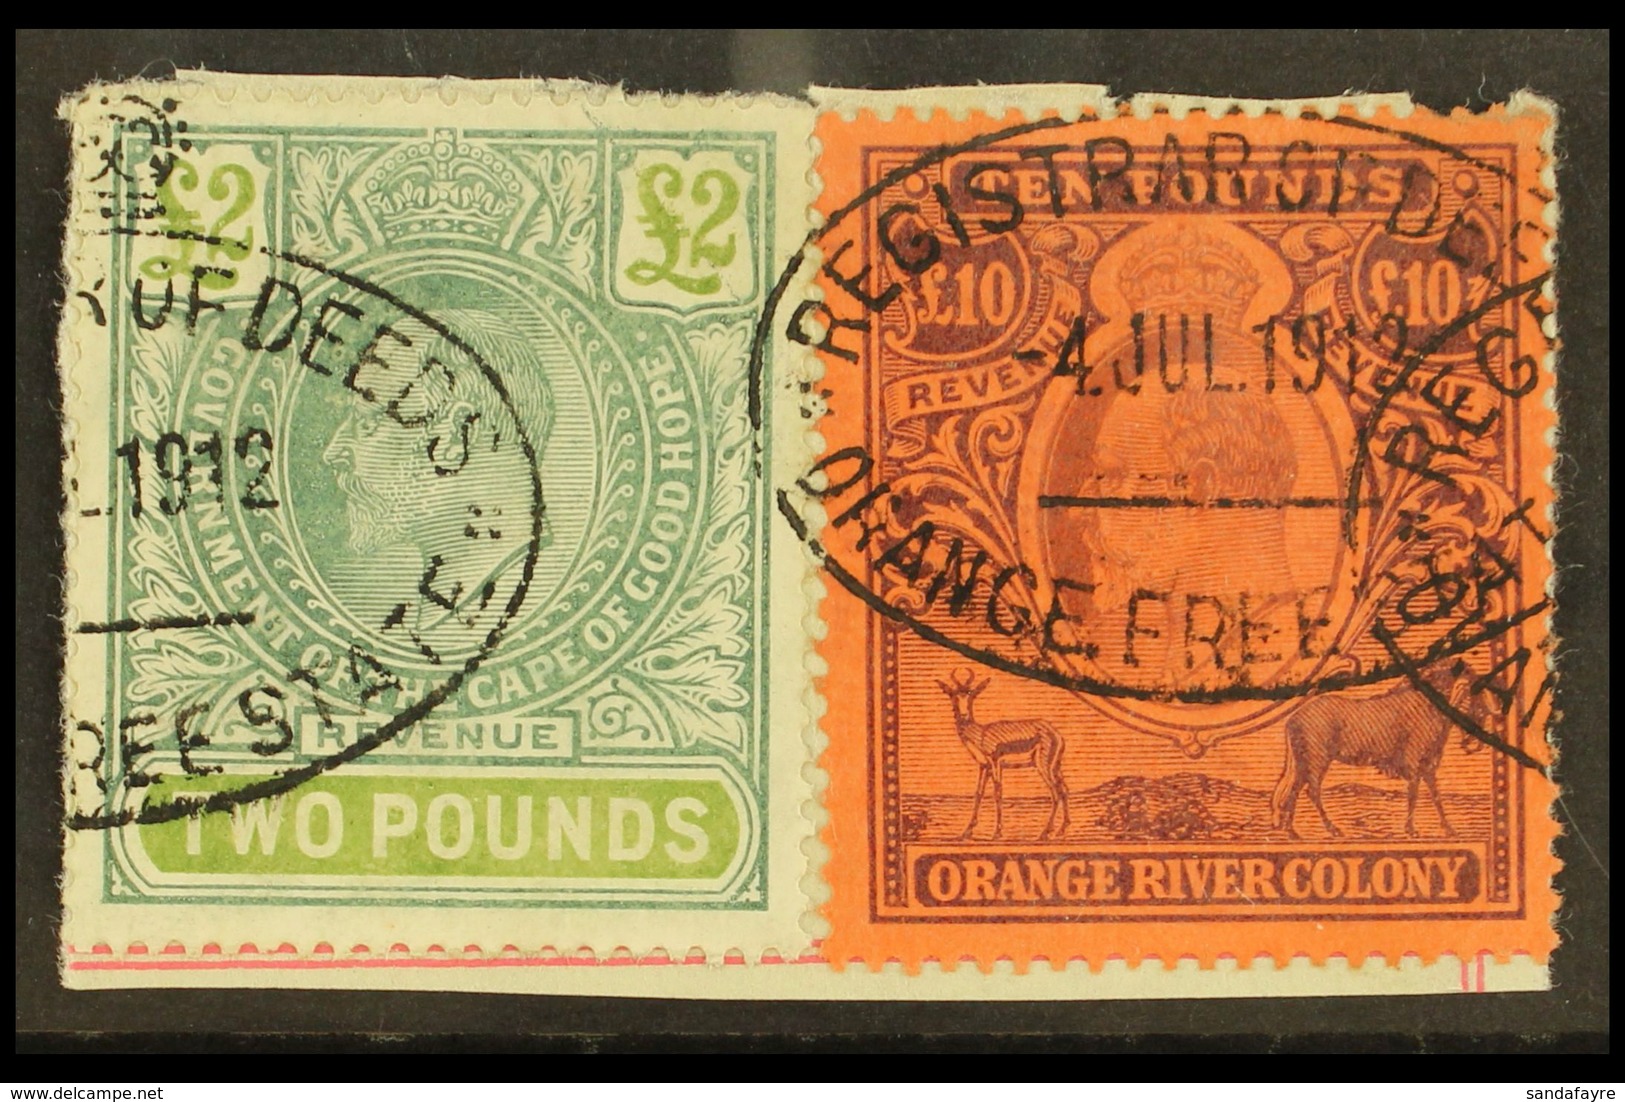 ORANGE RIVER COLONY REVENUES - INTERPROVINCIAL USE Piece Dated 4.7.12 With O.R.C. 1905 £10 Brown & Purple On Red (Barefo - Ohne Zuordnung